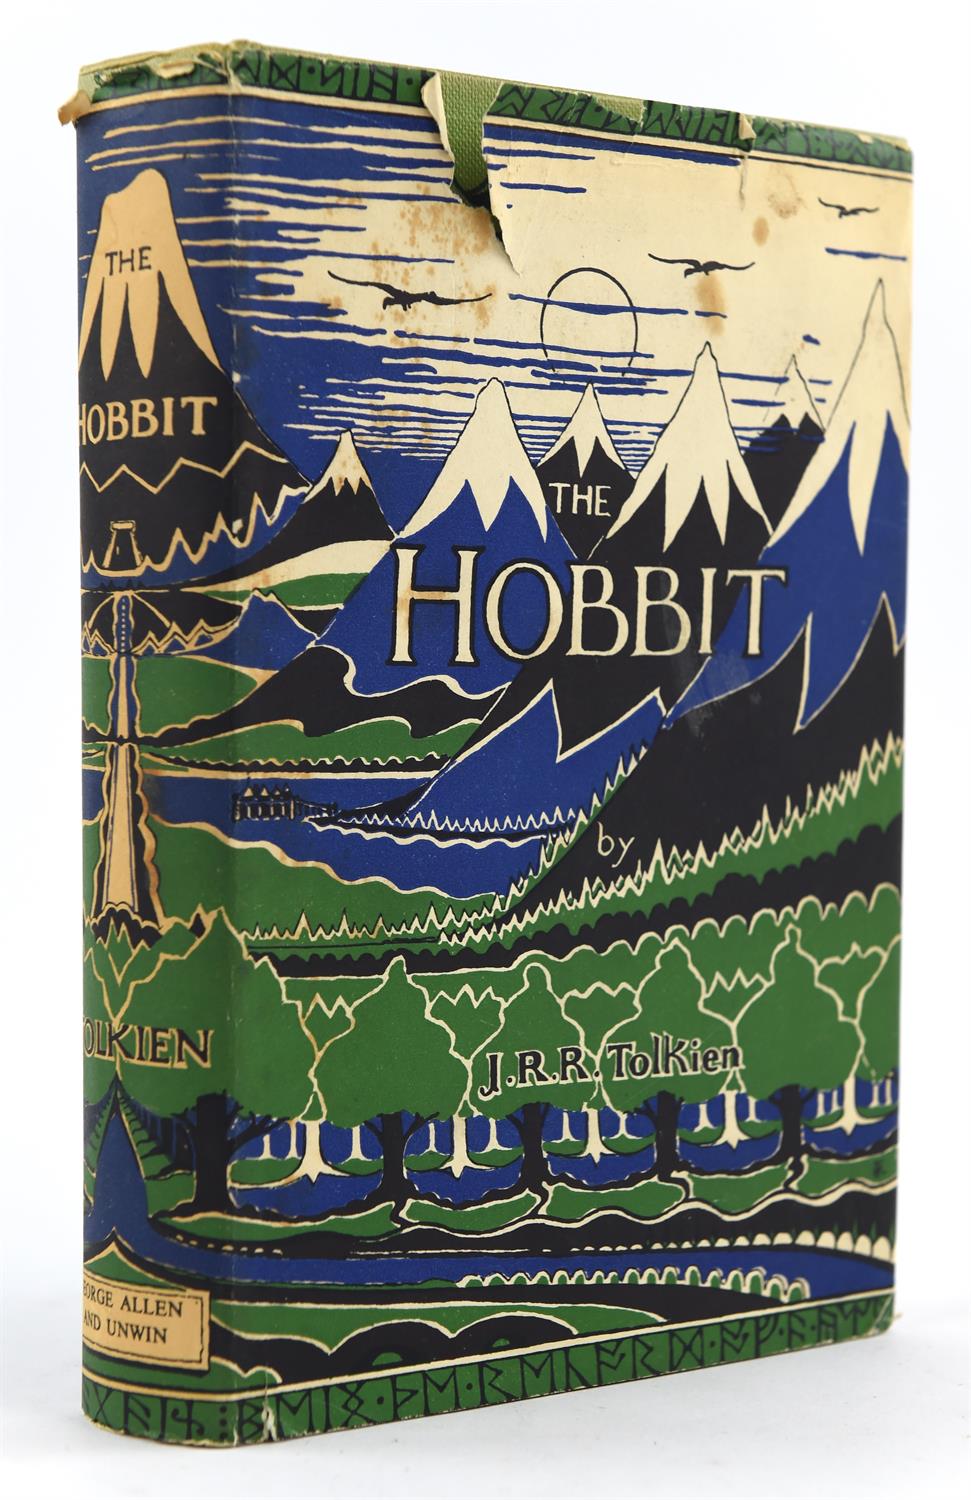 Tolkien, John Ronald Reuel - The Hobbit, 2nd edition, 14th impression, with colour frontispiece,